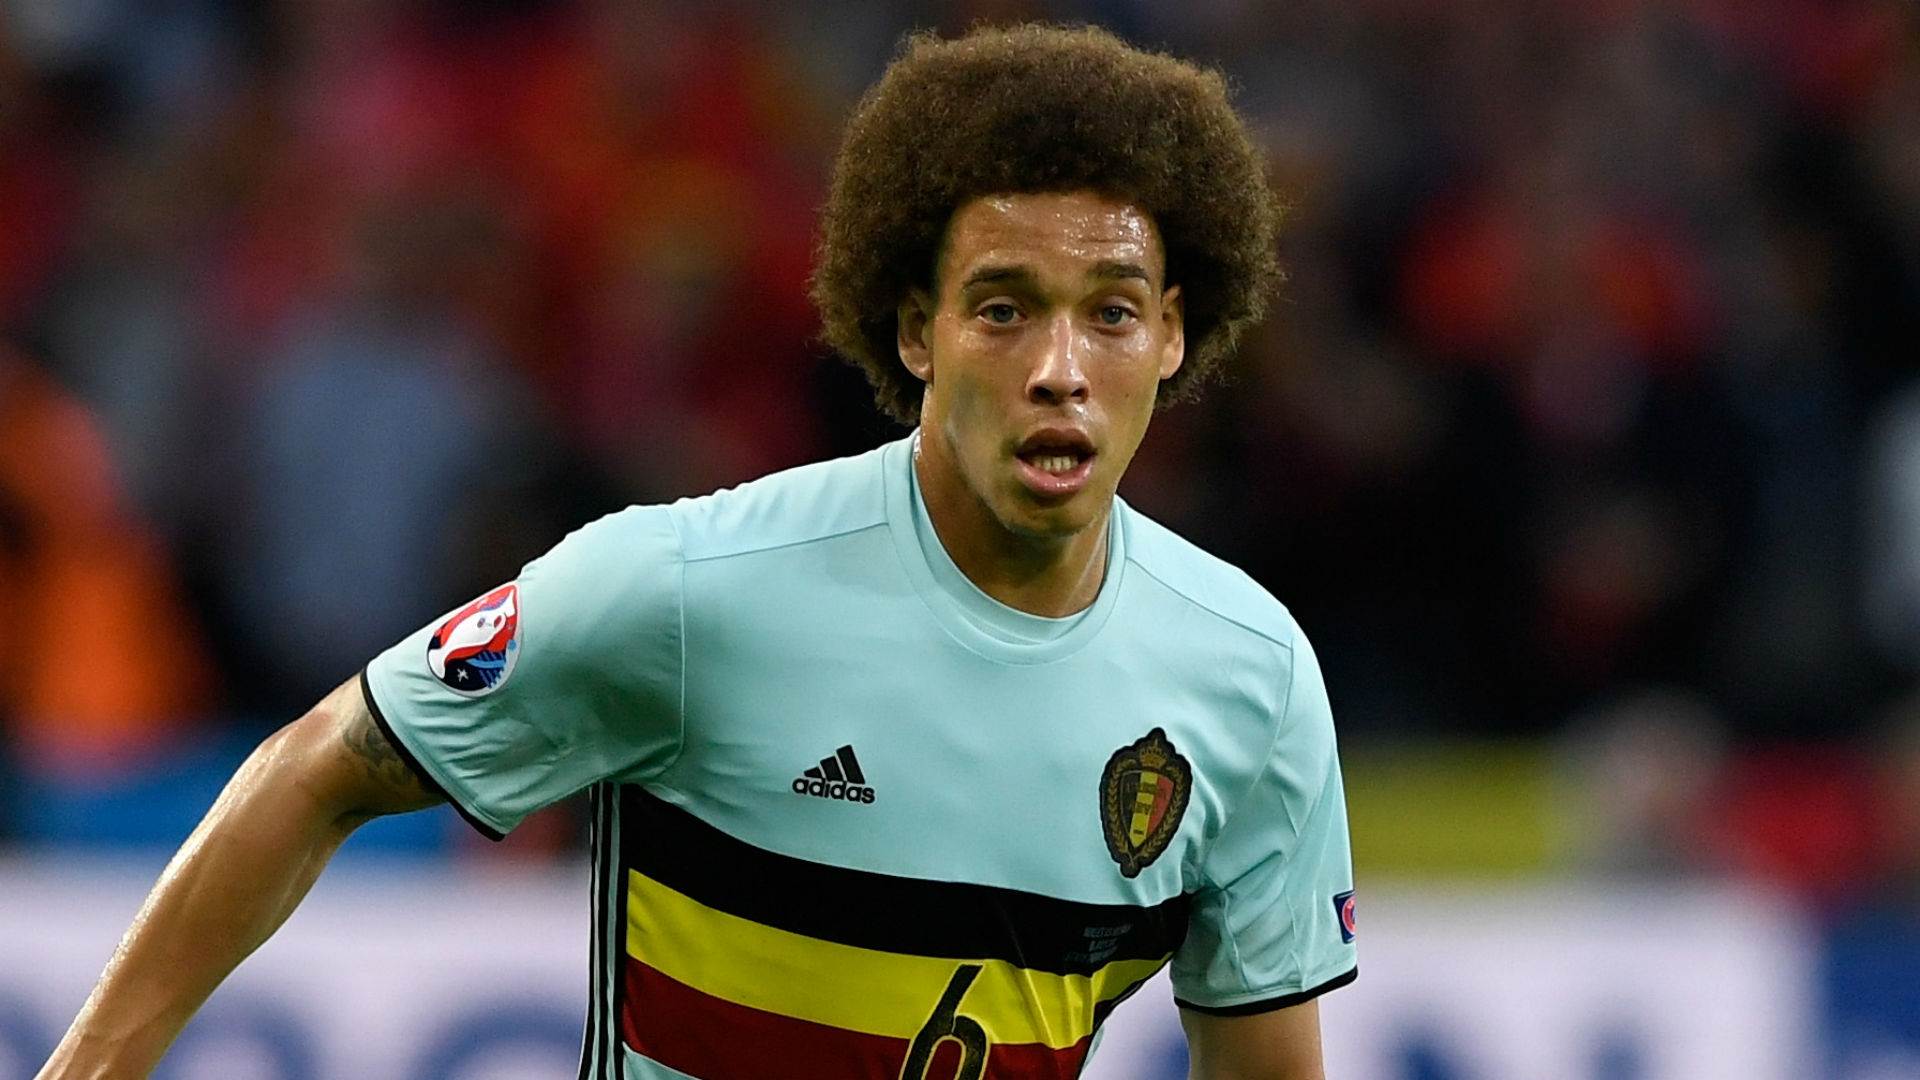 Axel Witsel 2018 Wallpaper, Football player